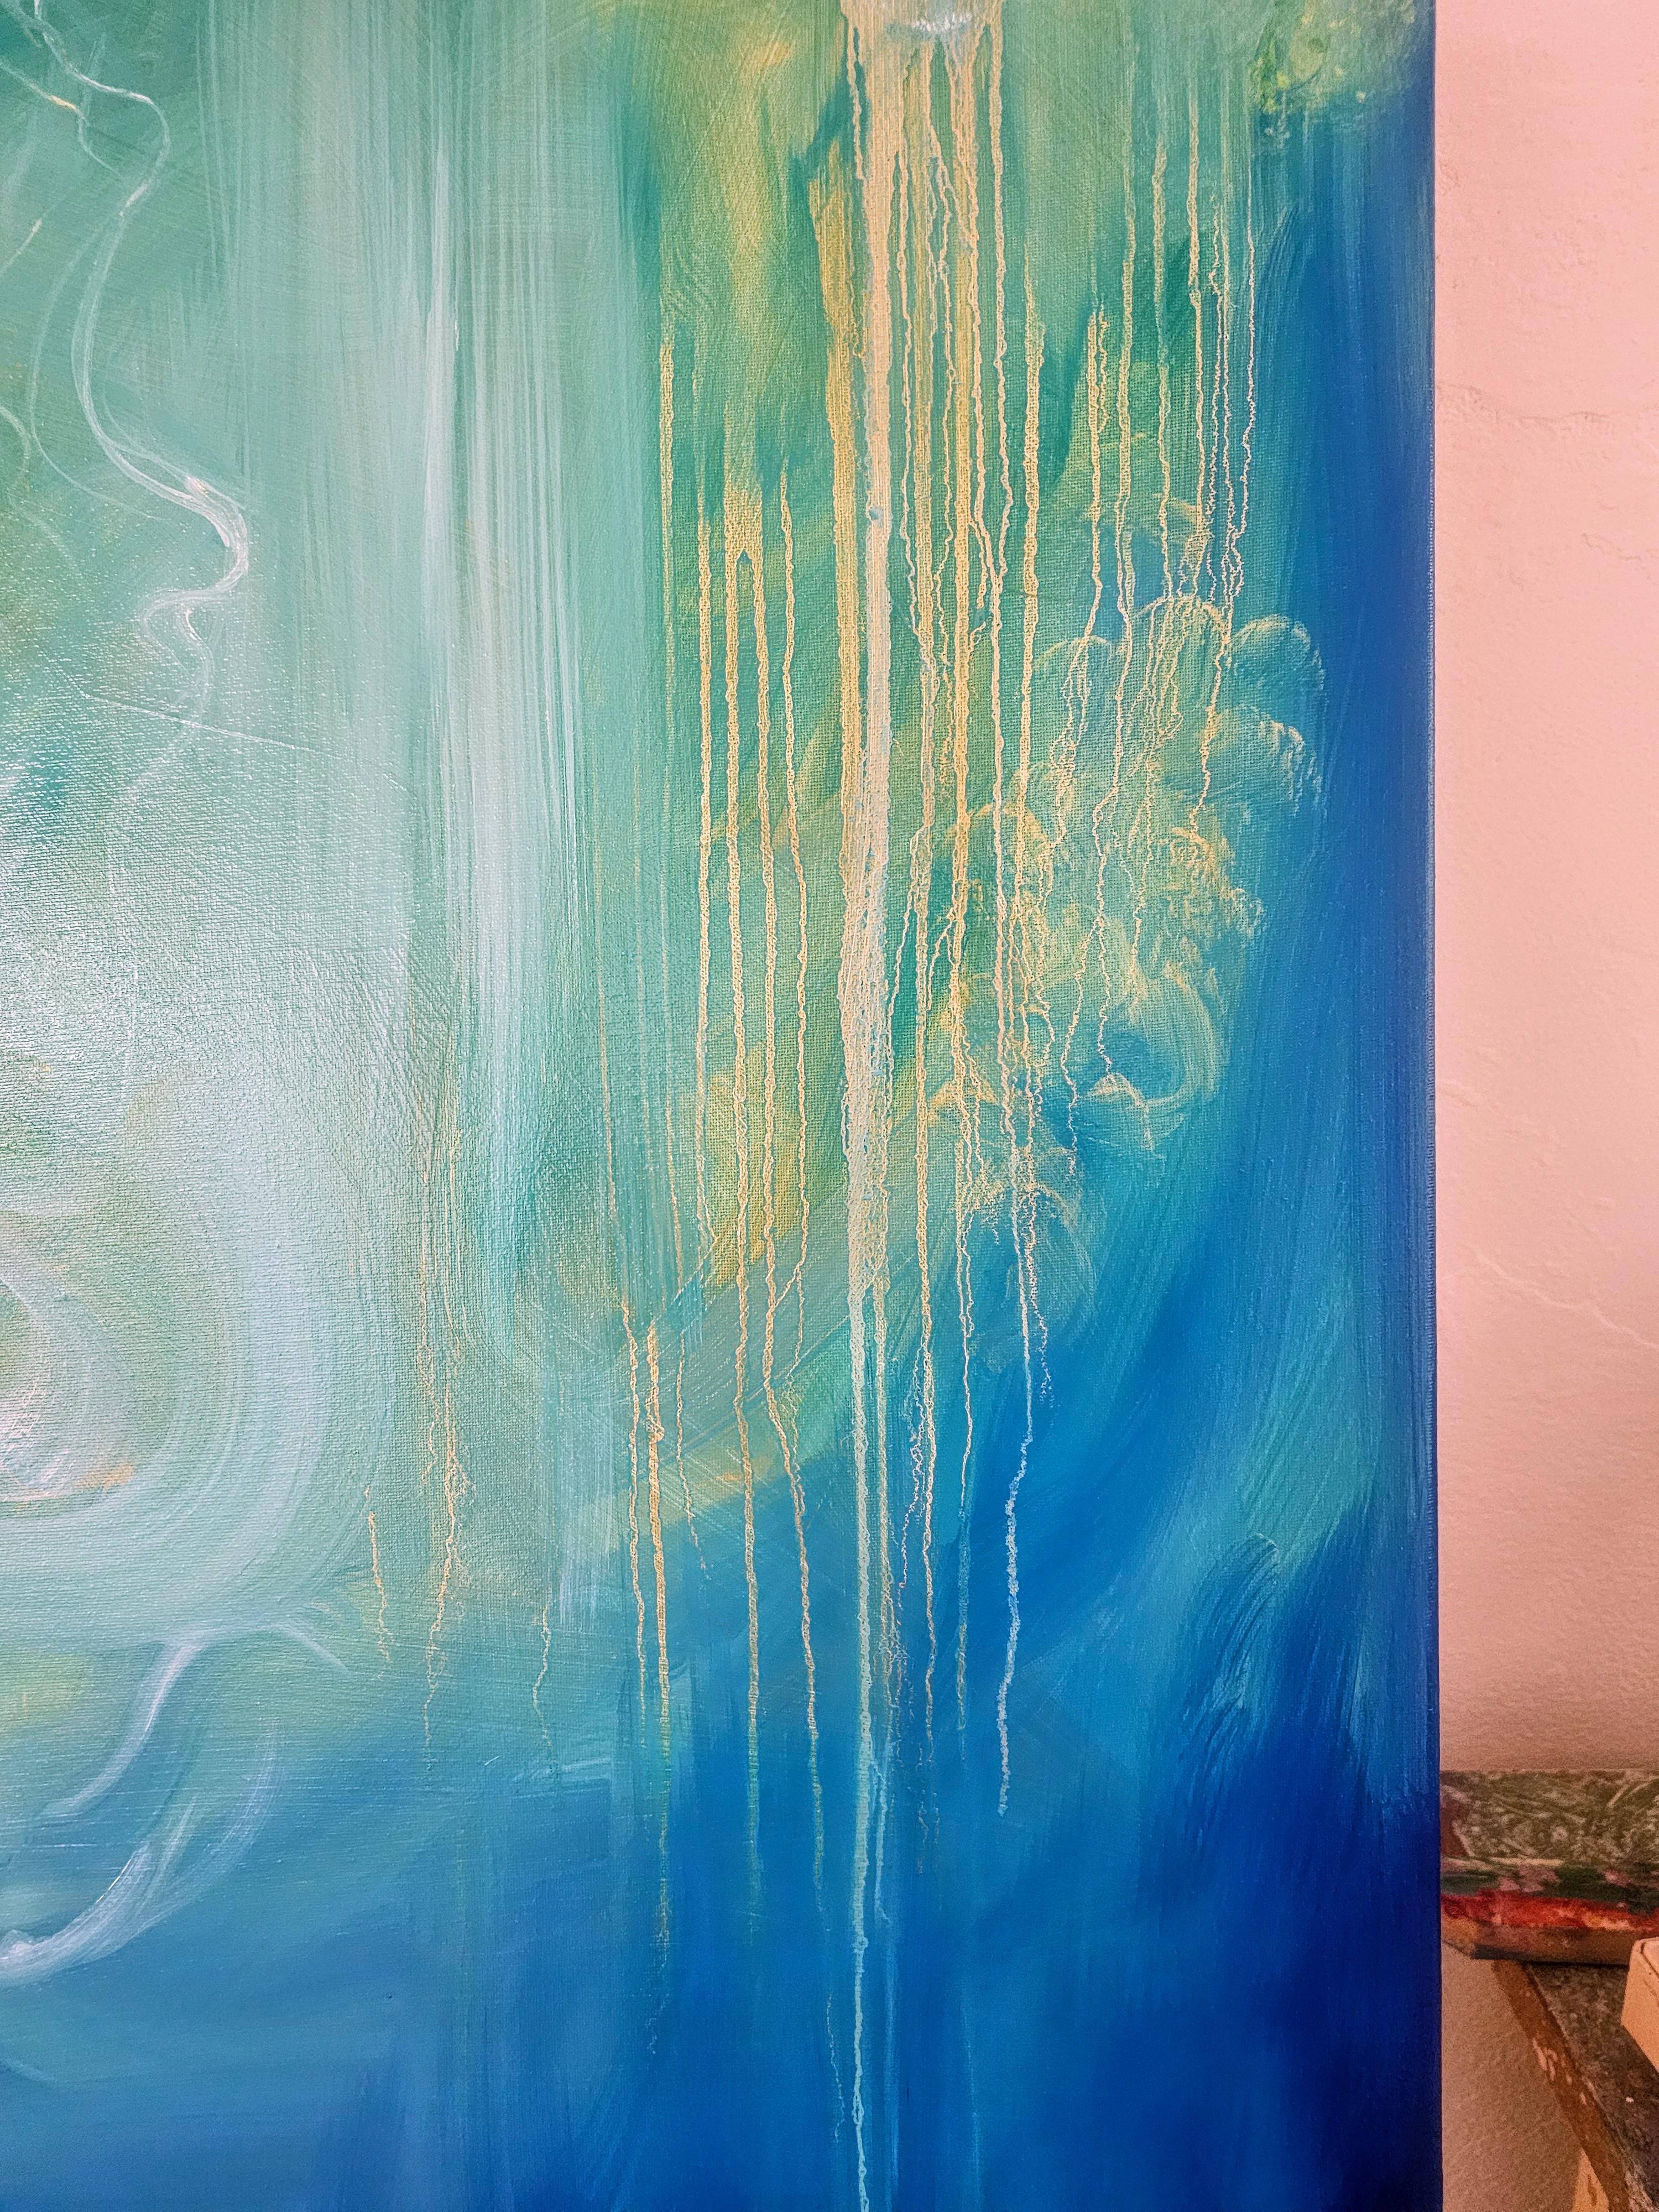 Jasmine of the sea - blue green abstract flowy sea painting For Sale 1